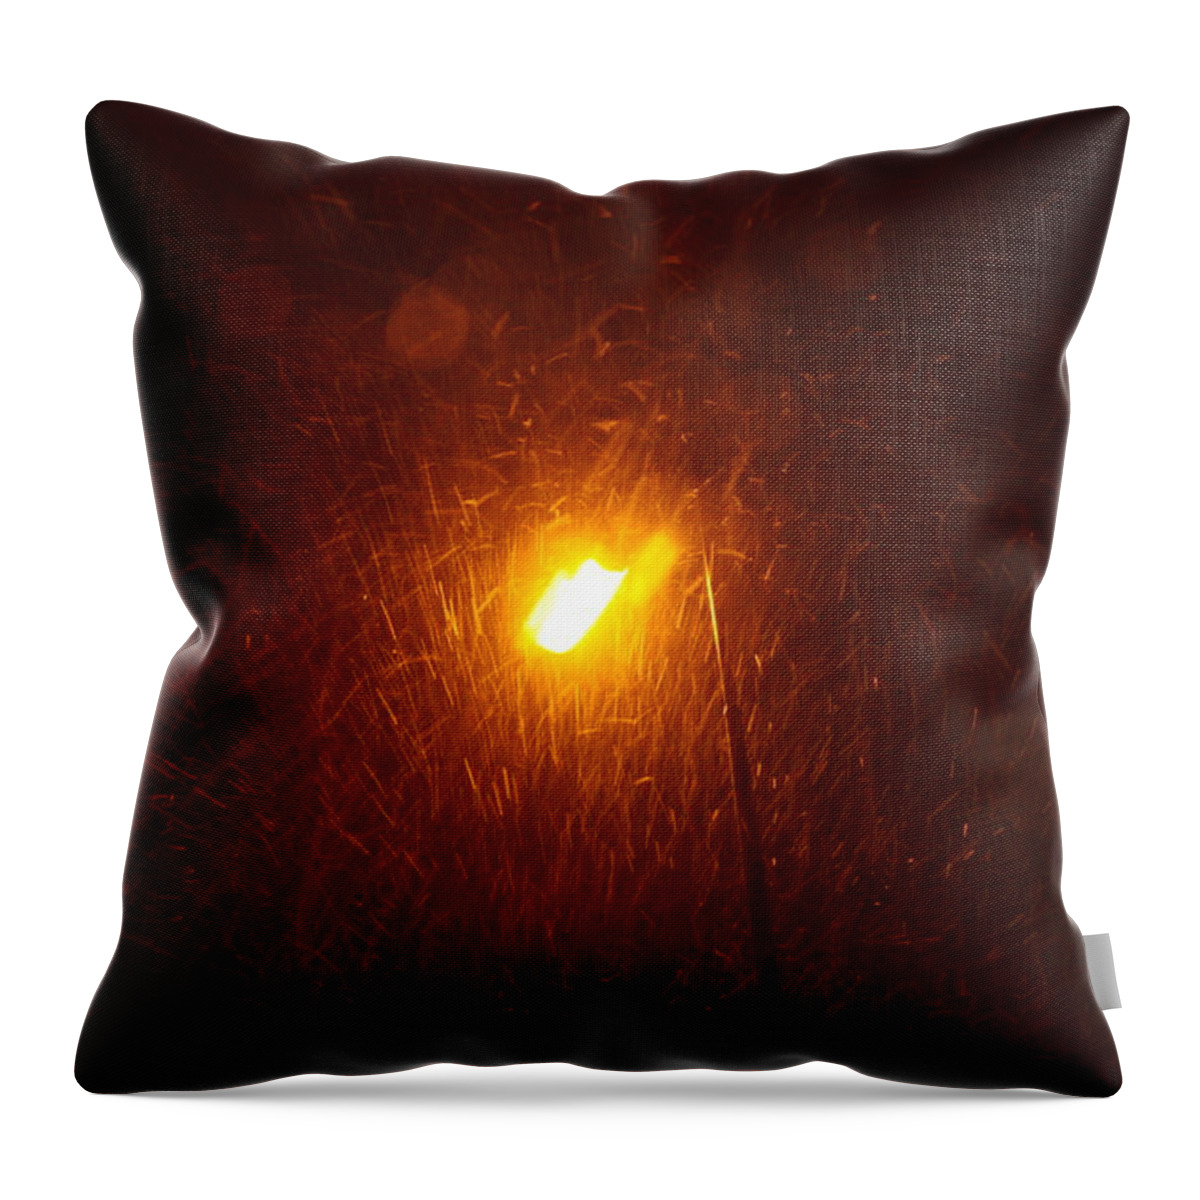 Snow Storm Throw Pillow featuring the photograph Heavy Snows by Lamplight by Jean Walker